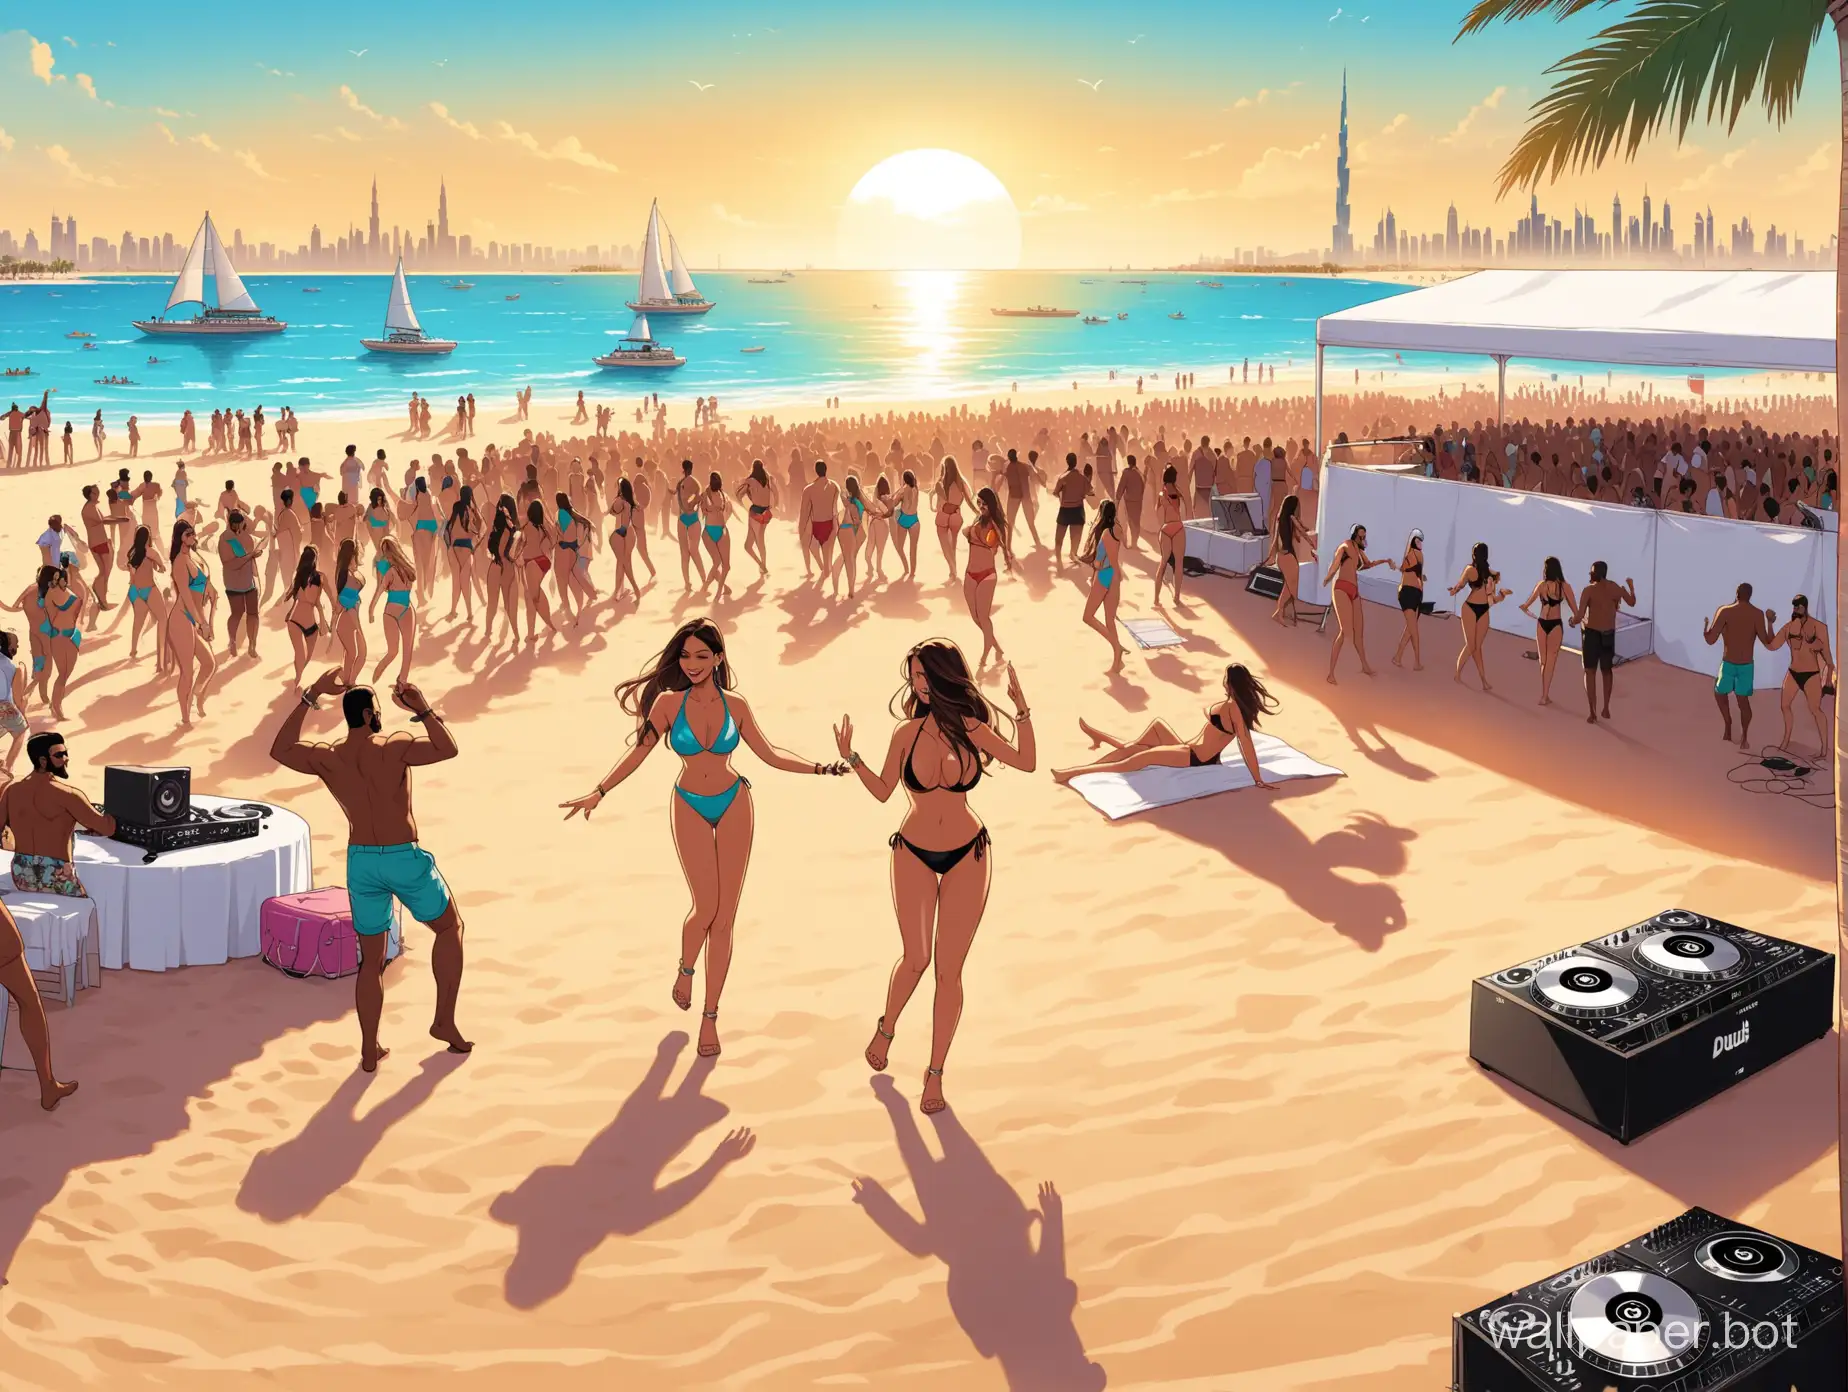 illustrated Dubai Beach Scene with a DJ on stage in background, with some people, relaxing on the beach and some people dancing all in sexy beachwear